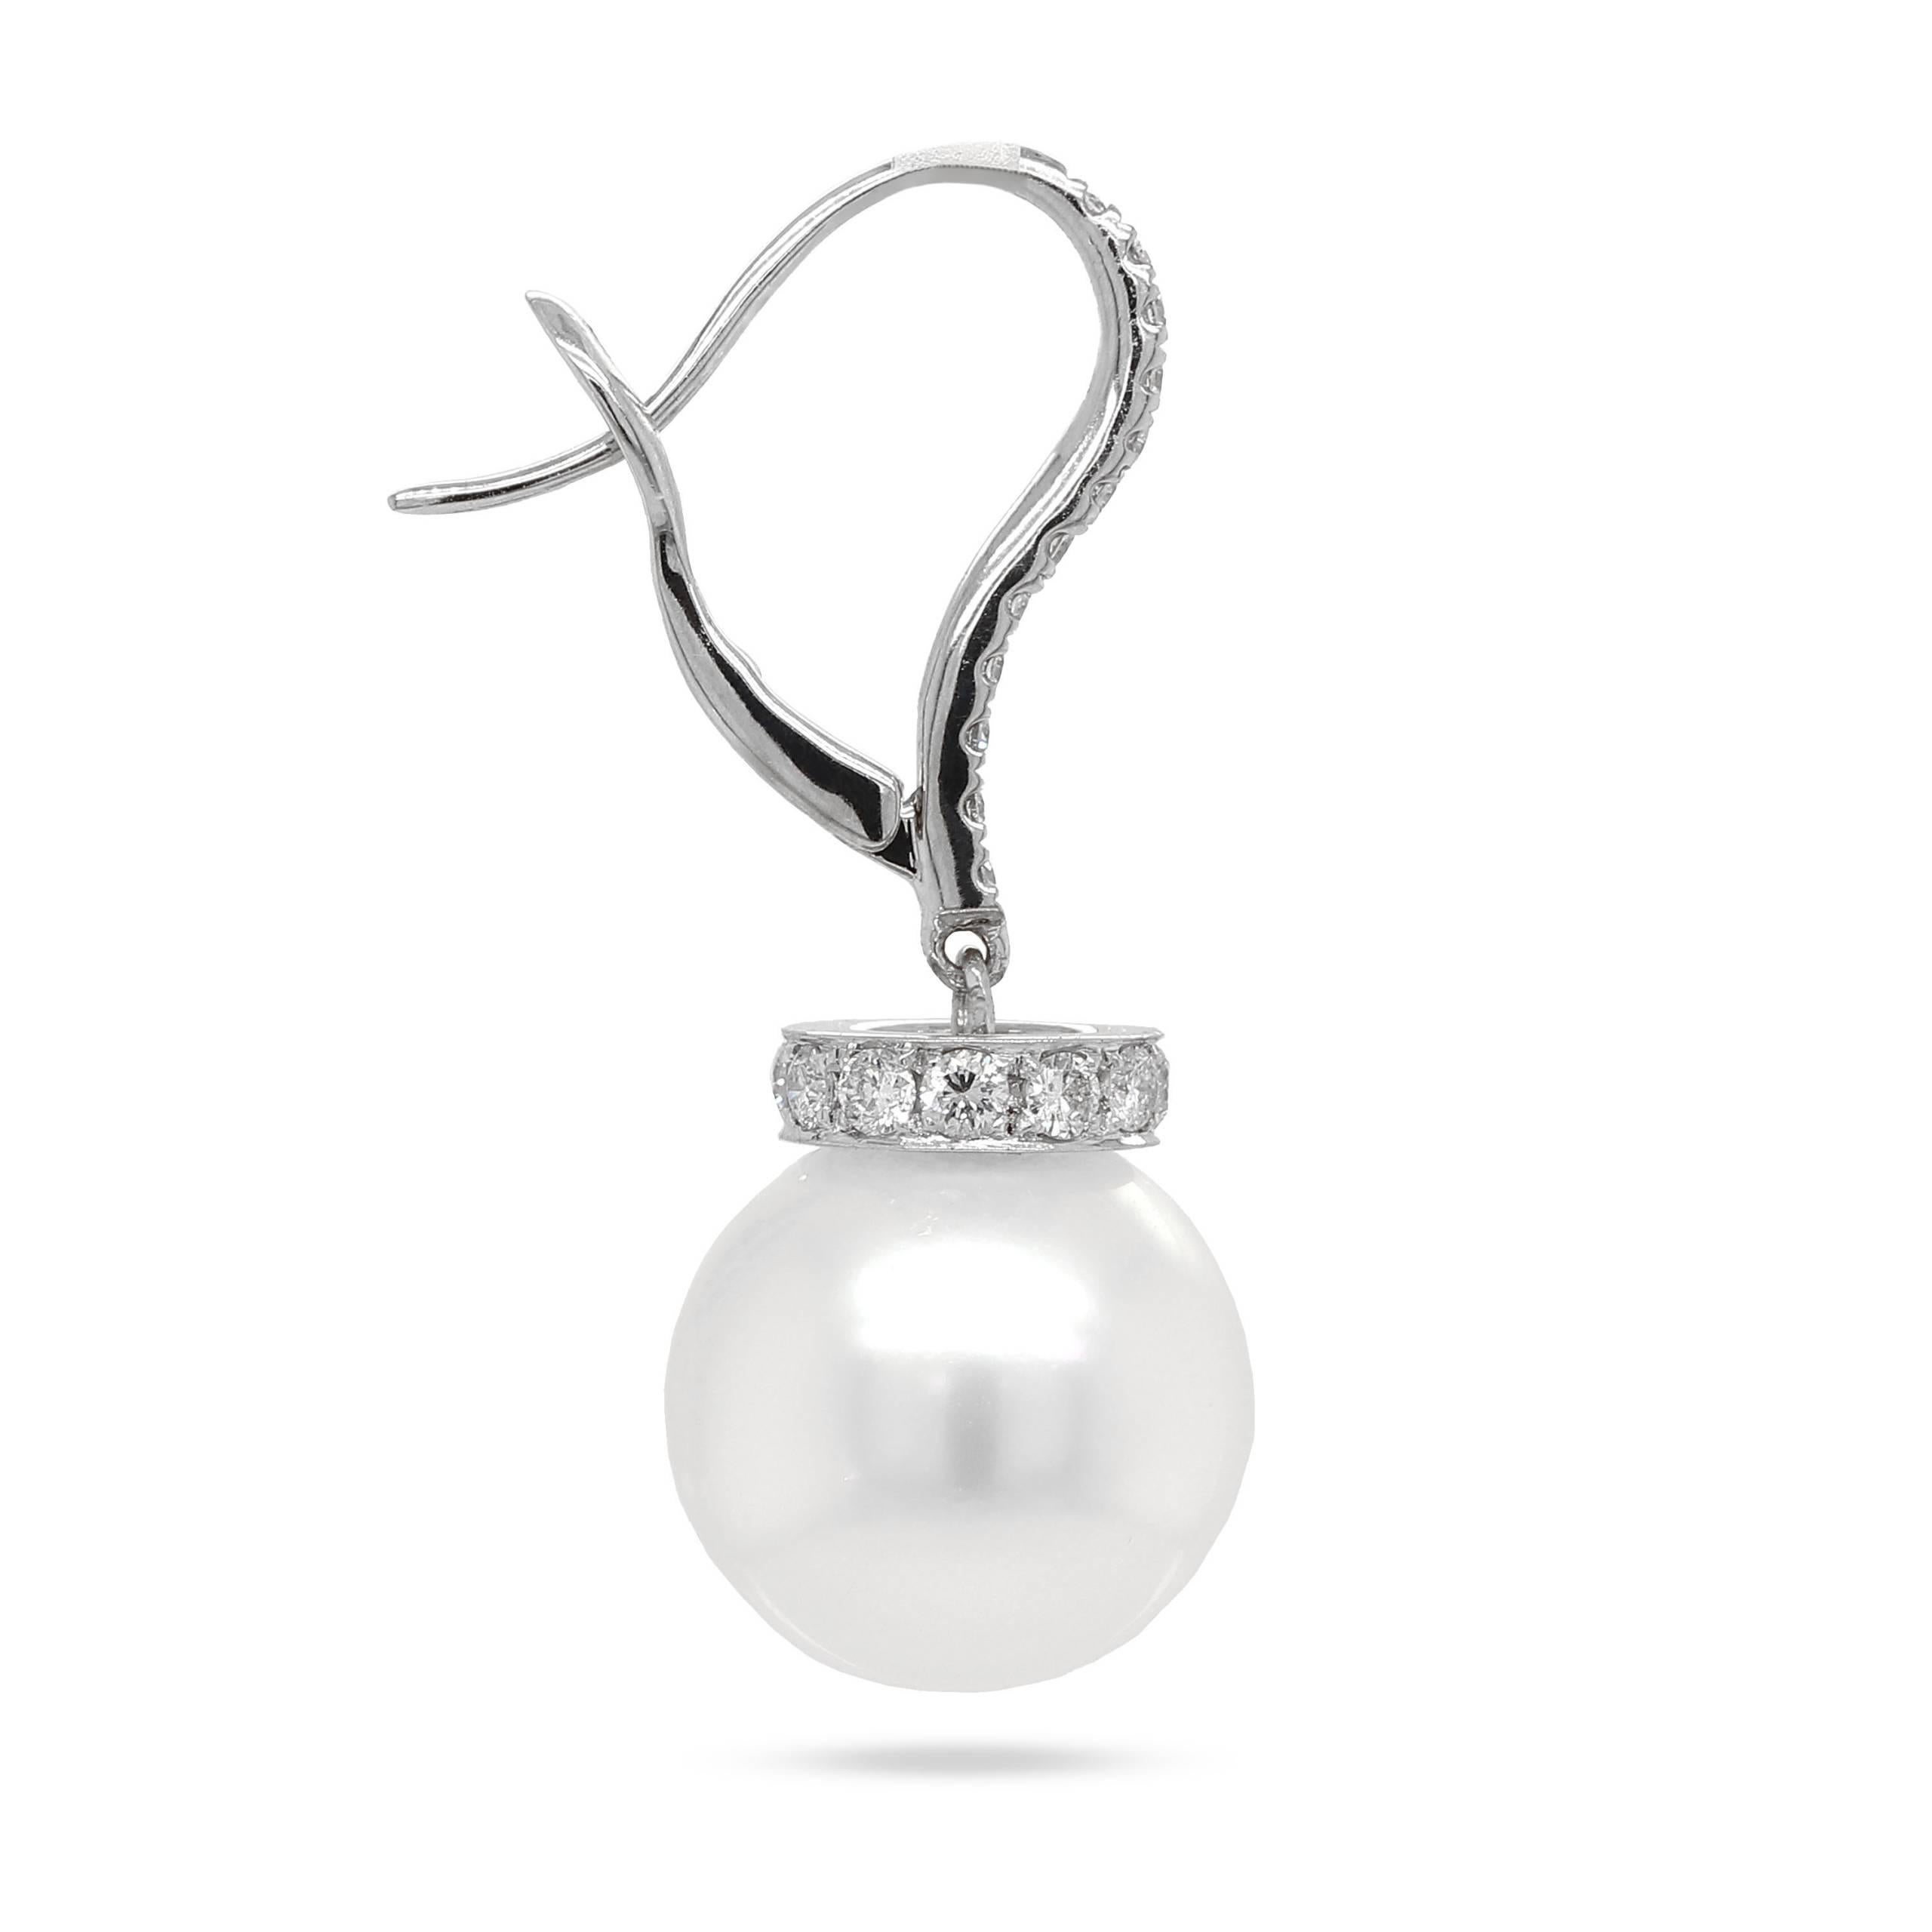 Brilliant Cut Natural South Sea Pearls Earrings in 14k White Gold For Sale